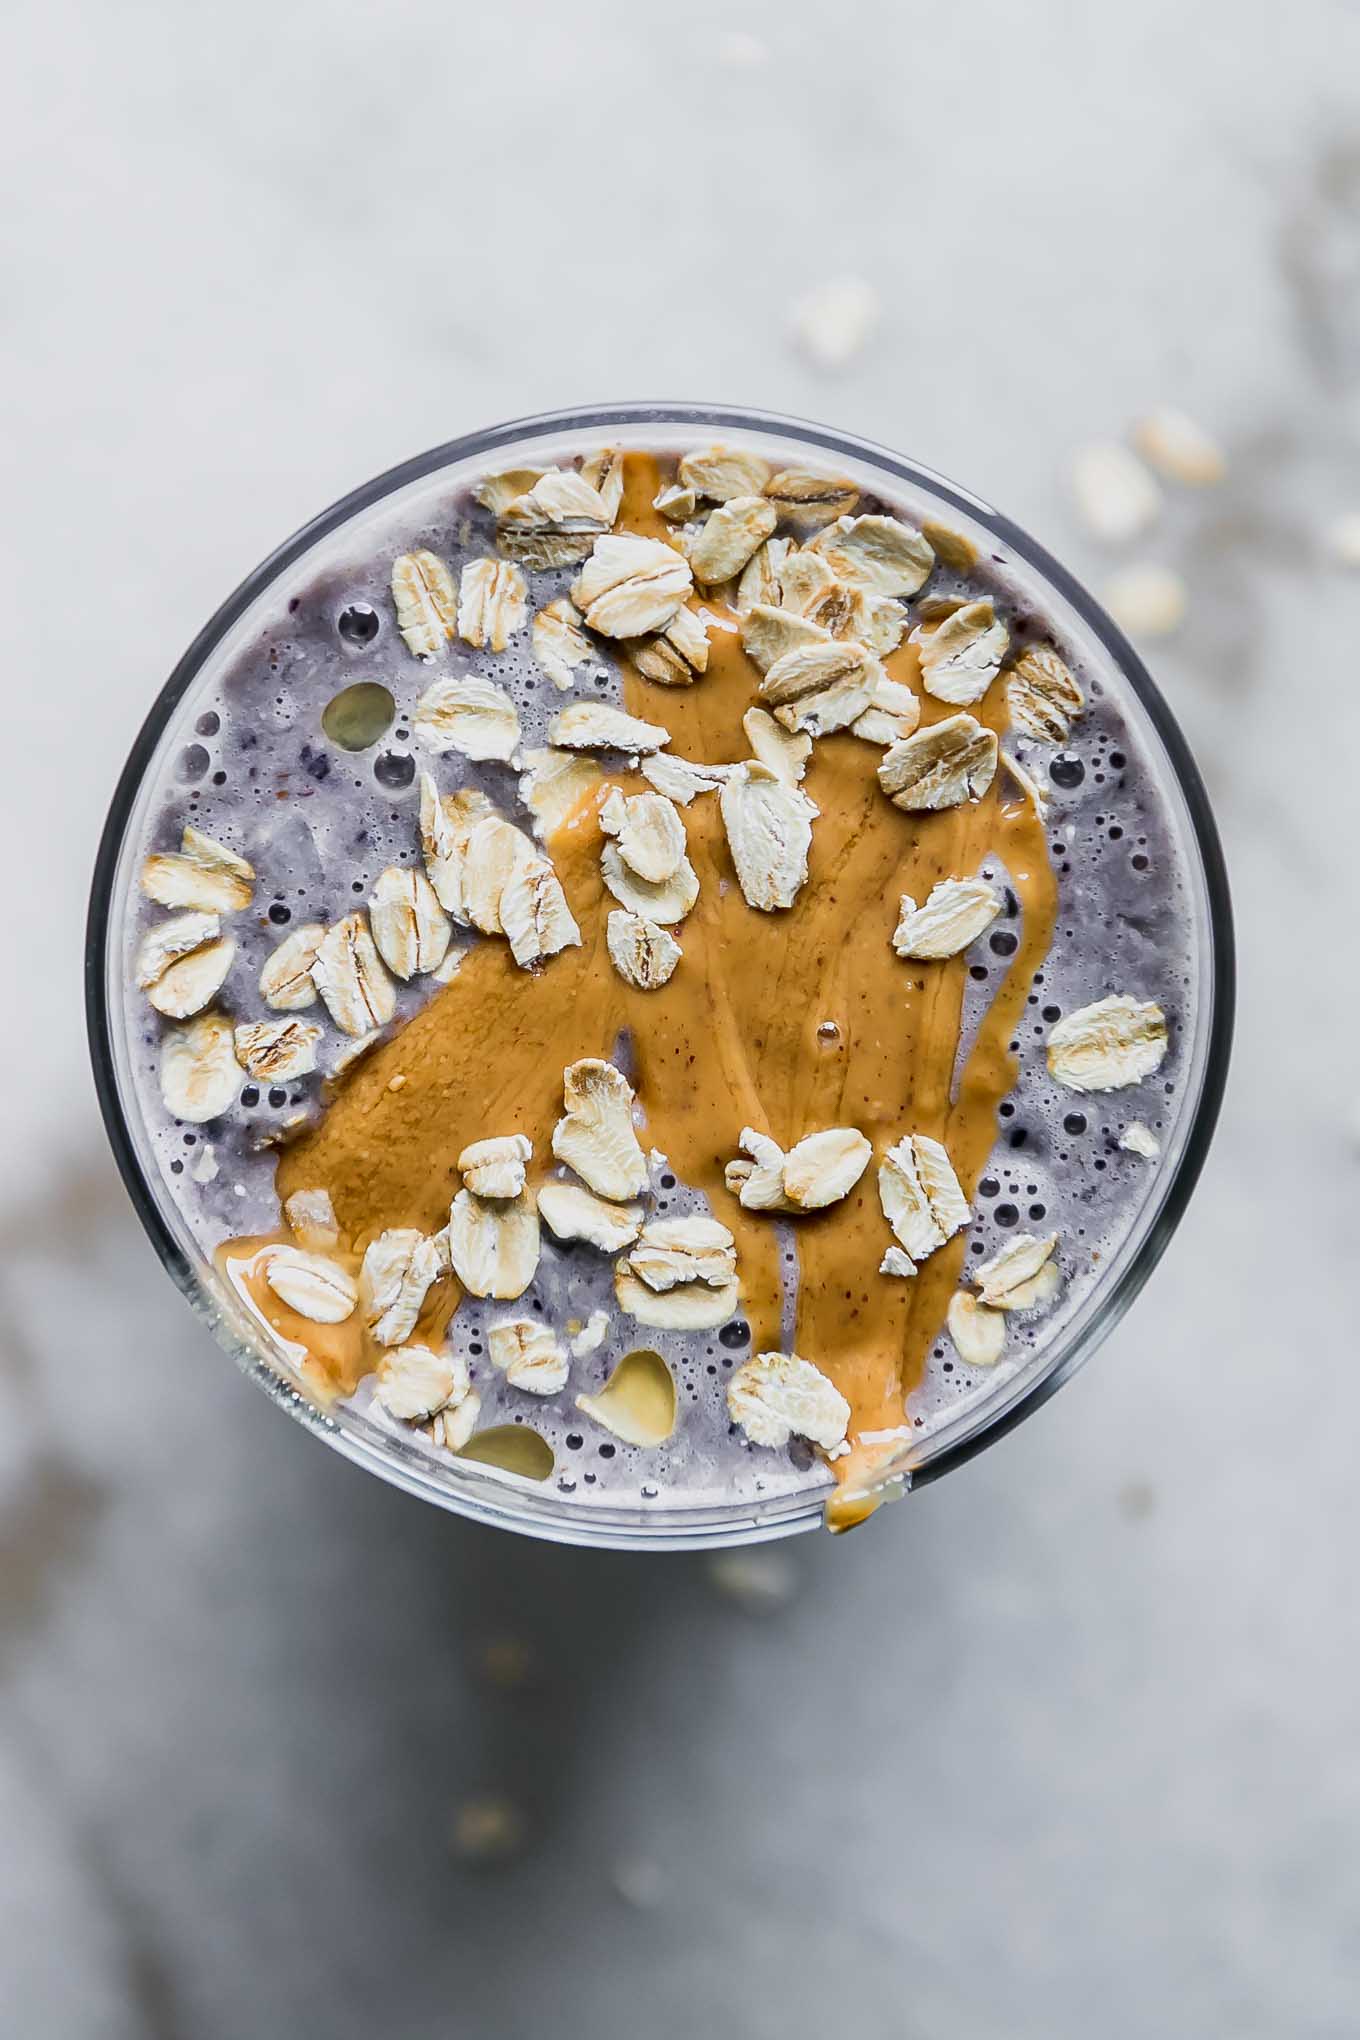 a close up photo of a blueberry smoothie with nut butter and garnished with oats